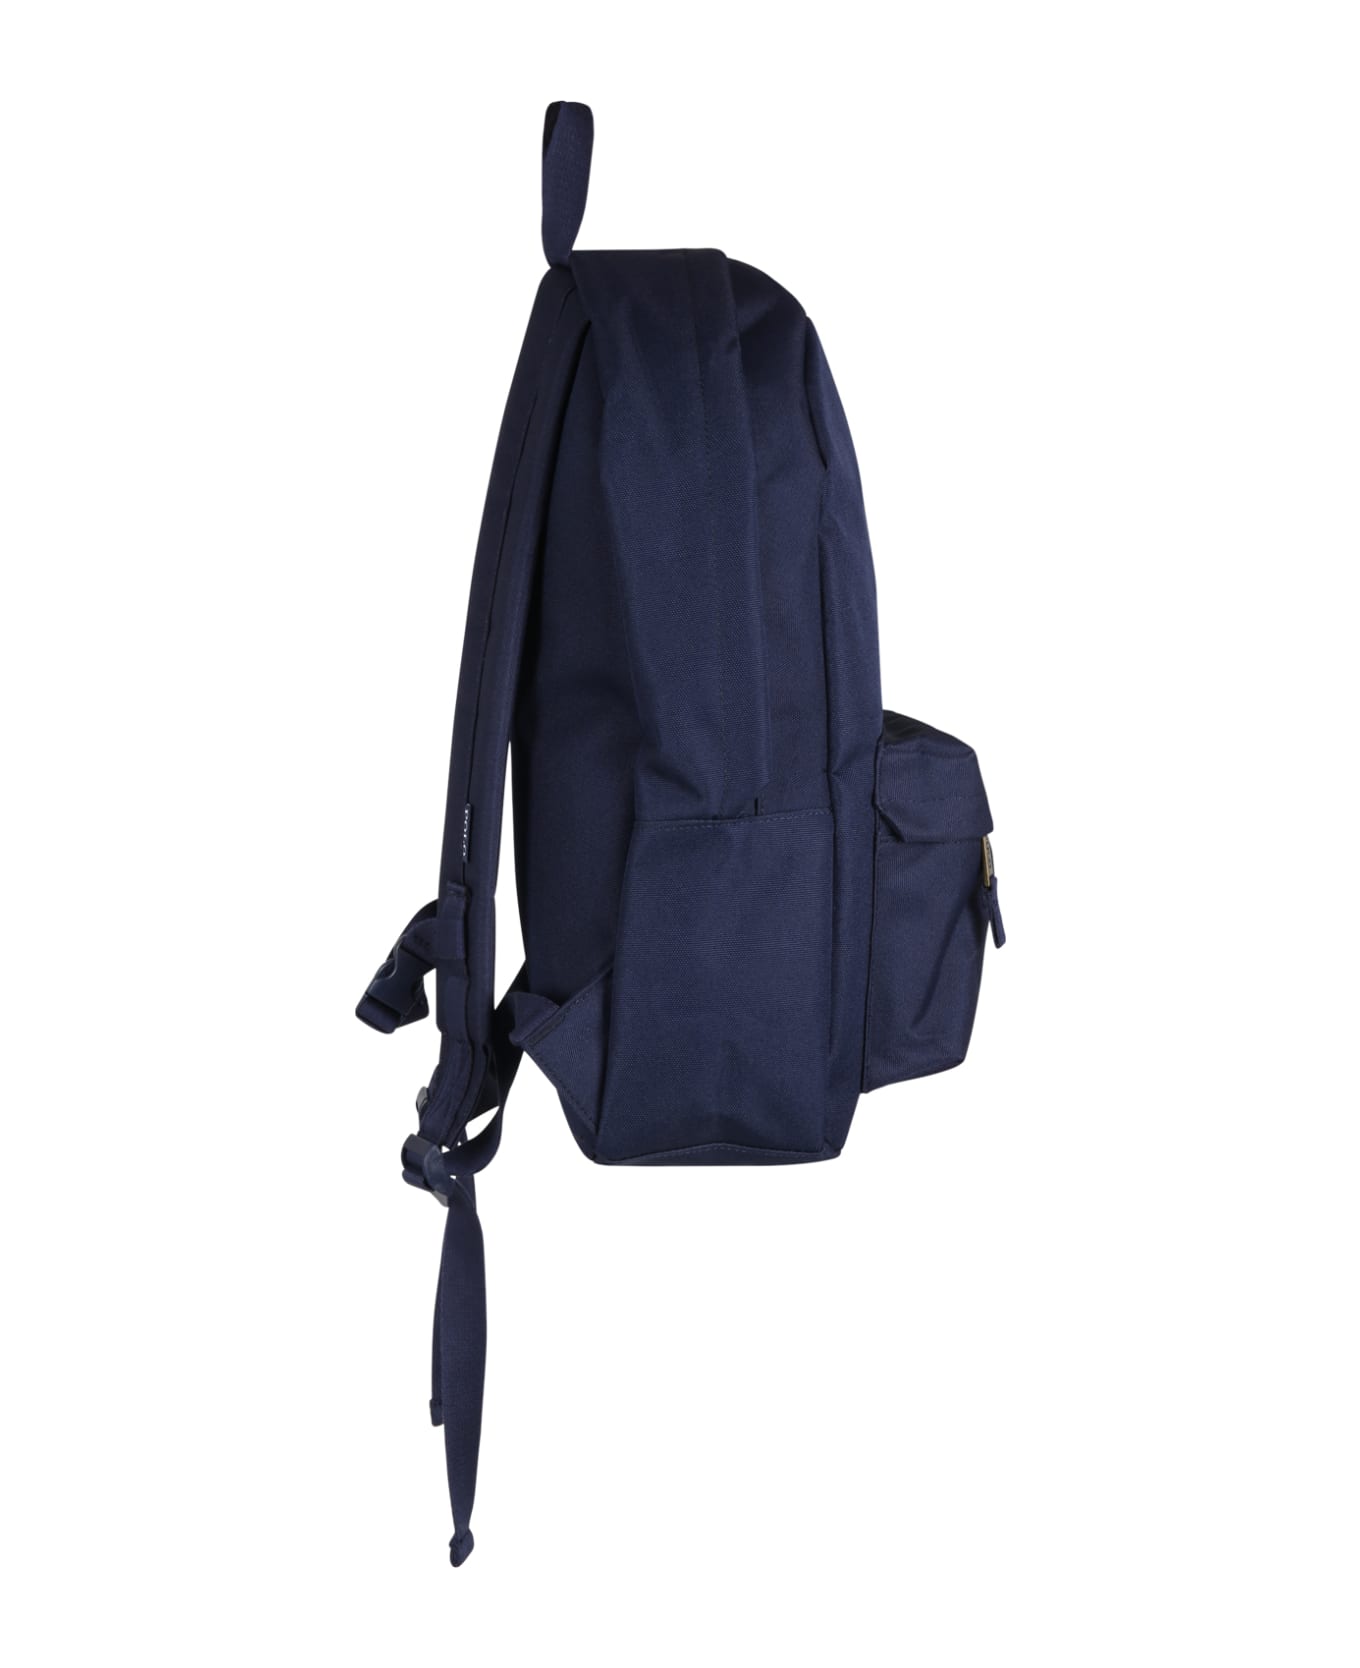 Ralph Lauren Blue Backpack For Boy With Iconic Pony Logo - Blue